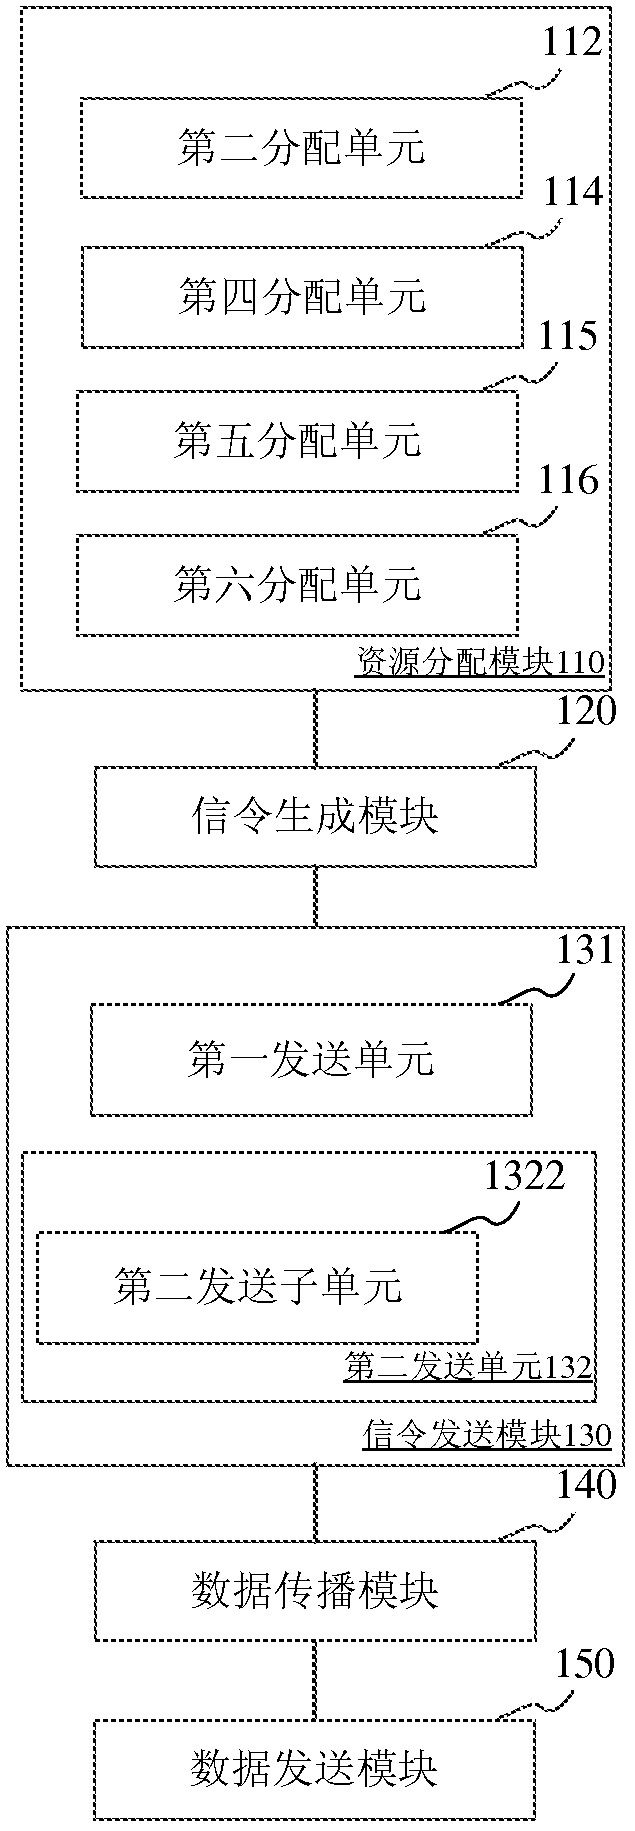 Device communication method and device